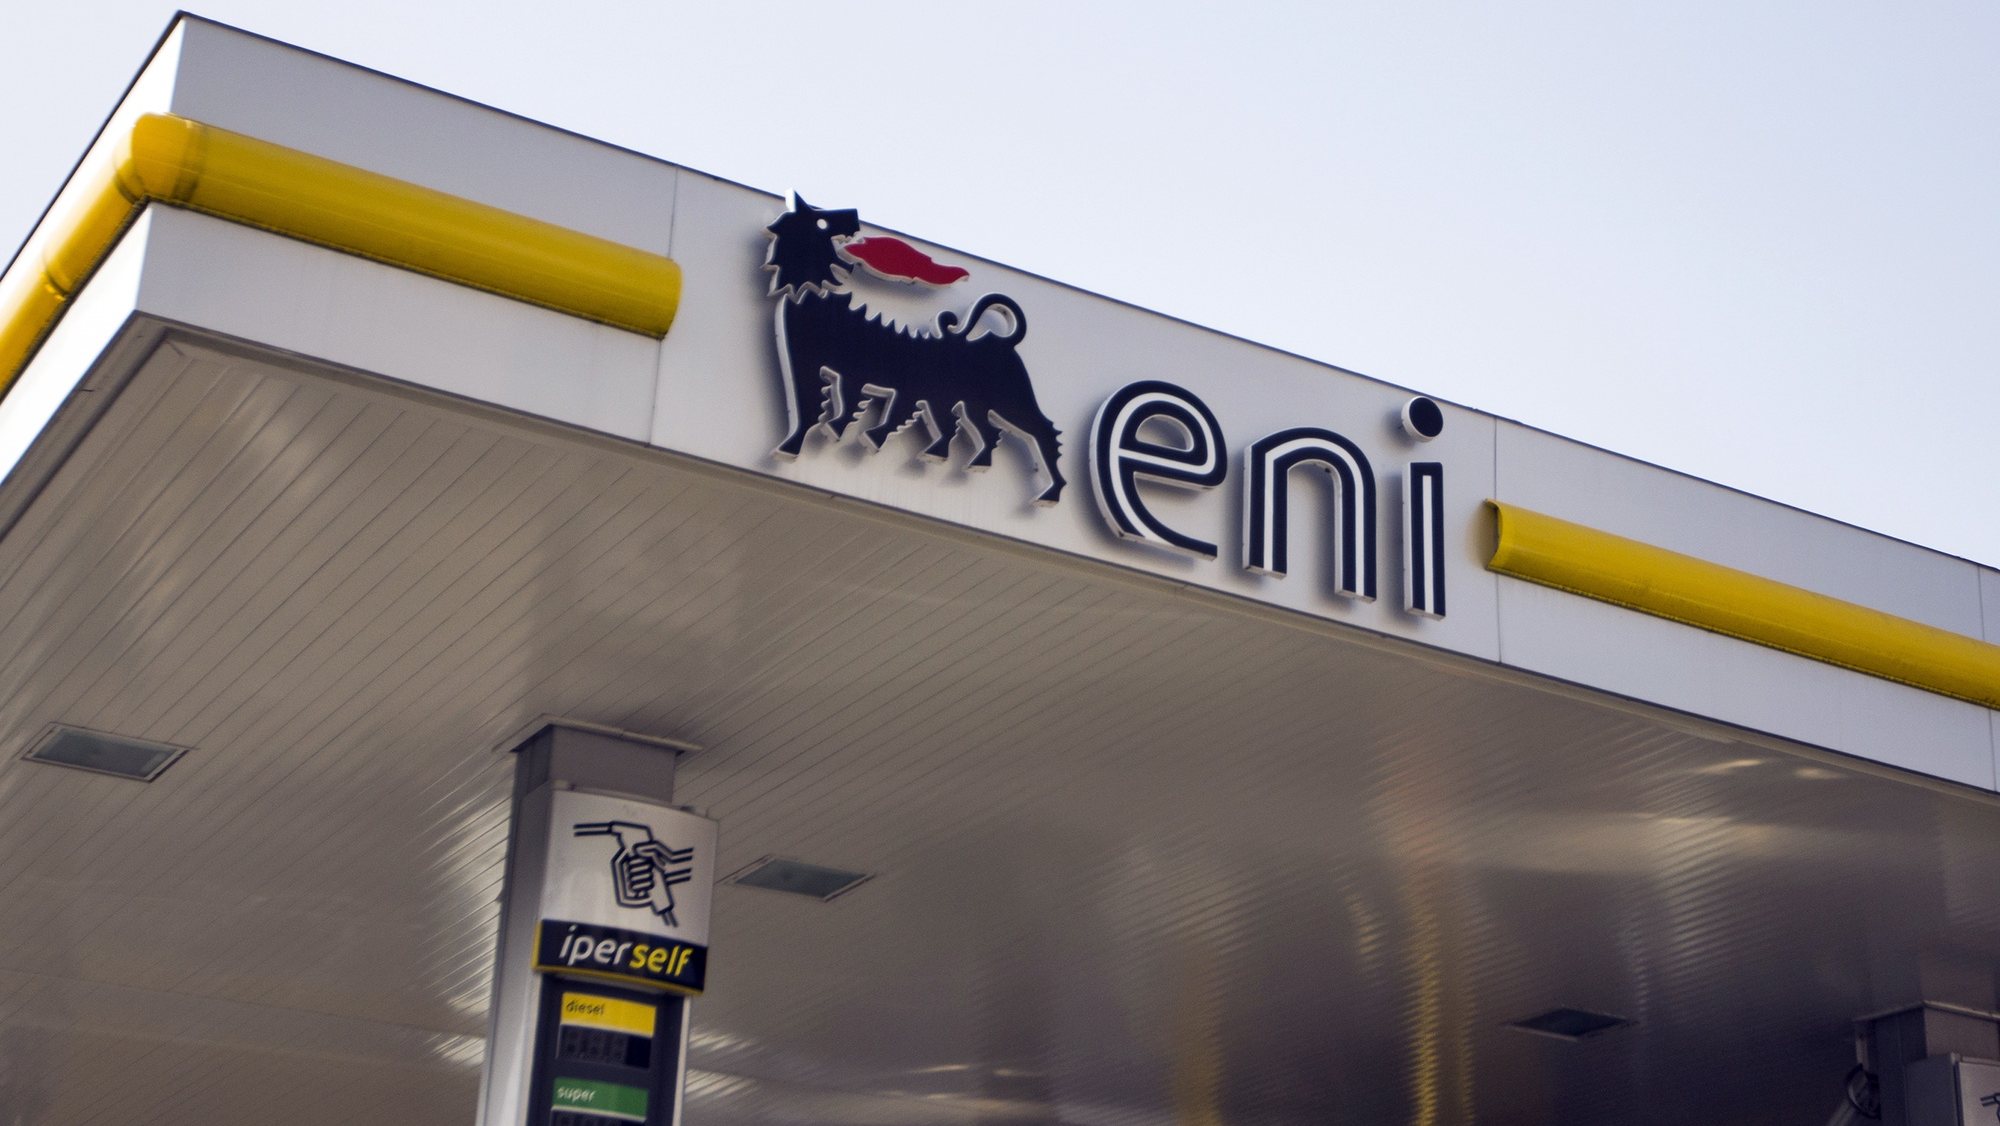 epa07948251 (FILE) - A general view shows an ENI pump station in Siena, Italy, 22 March 2016  (reissued 25 October 2019). ENI is to release their 3rd quarter results on 25 October 2019.  EPA/MATTIA SEDDA *** Local Caption *** 52688746